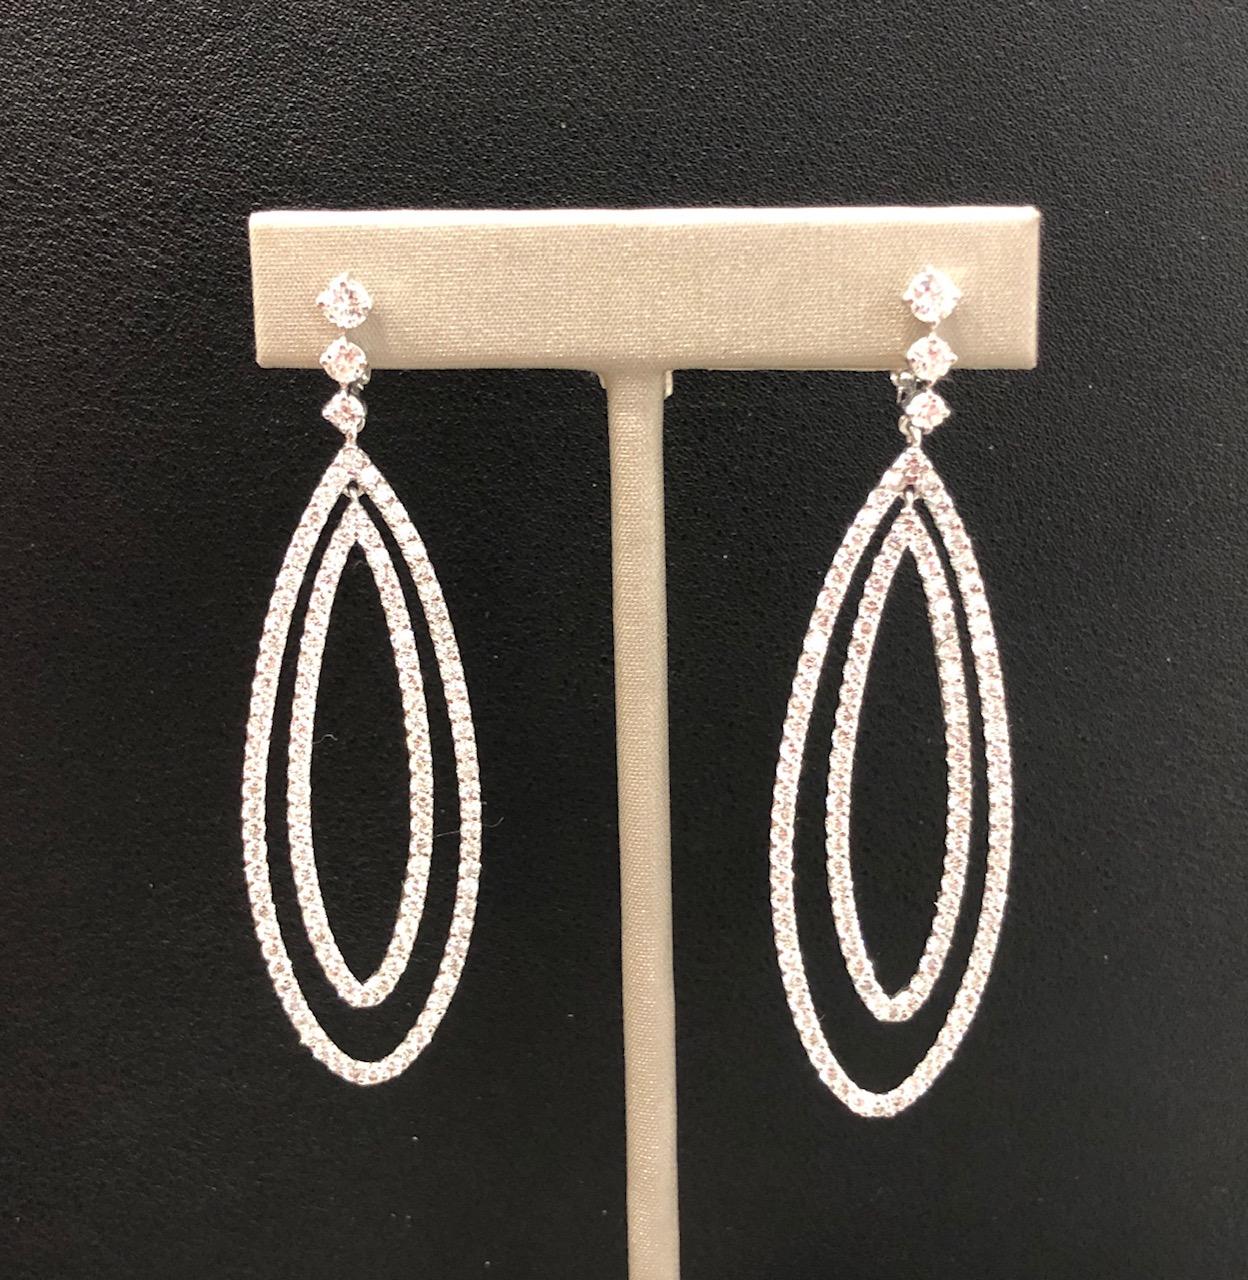 The earrings are bead set with 5.05 carats of full cut round diamonds, near colorless range SI Clarity. Measuring 2.75 inches long by .75 inch wide, they have a lot of presence and are versatile for wearing at a variety of events. 